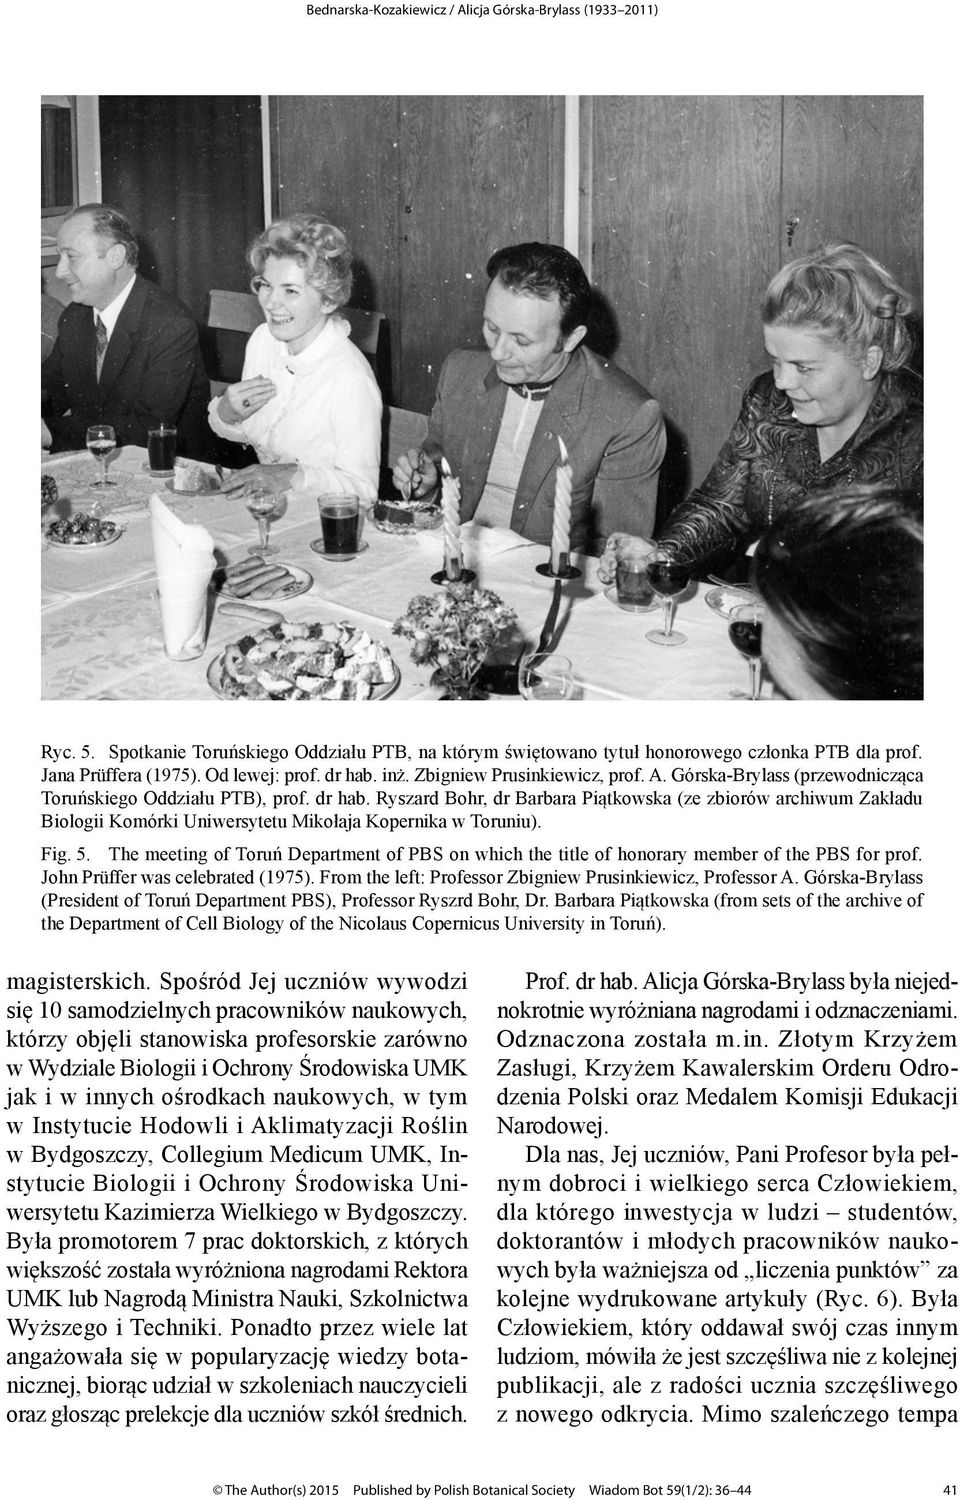 Fig. 5. The meeting of Toruń Department of PBS on which the title of honorary member of the PBS for prof. John Prüffer was celebrated (1975).